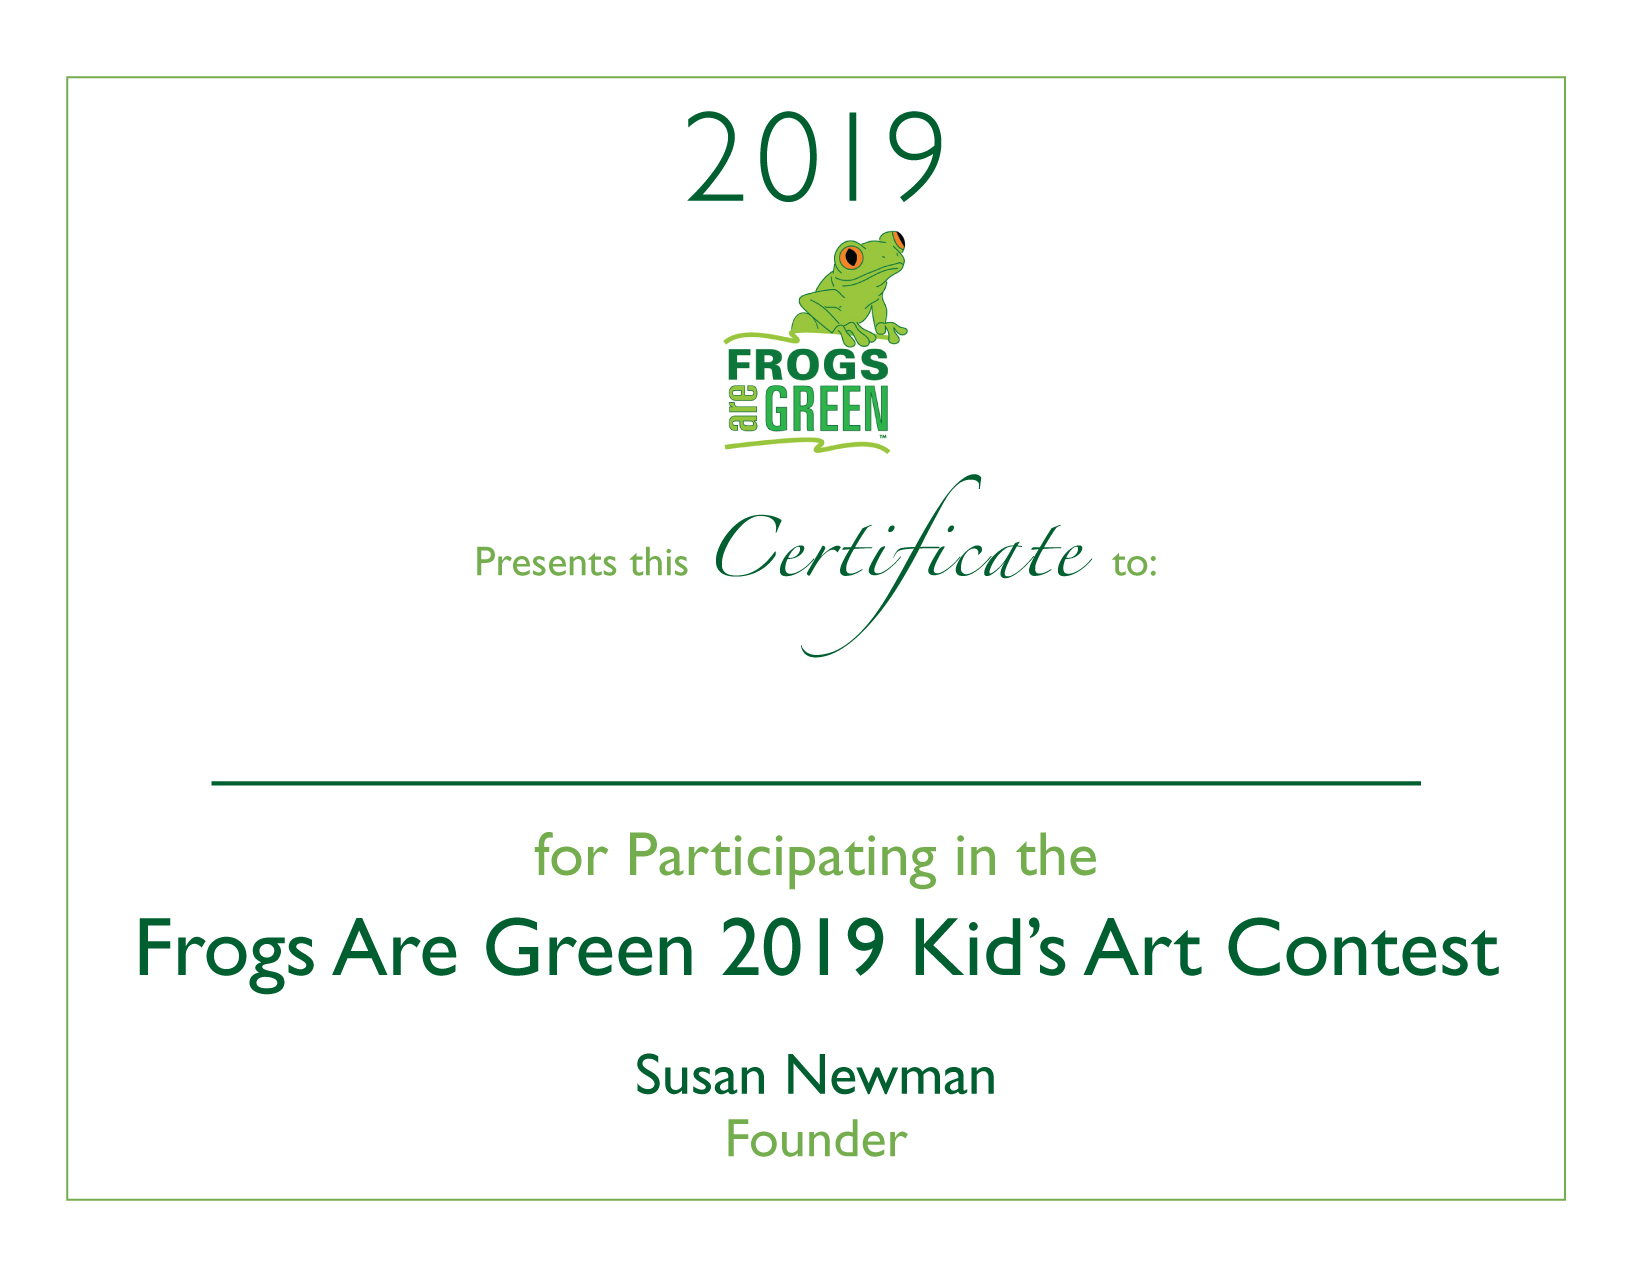 2019 Frogs Are Green Certificate for Participation